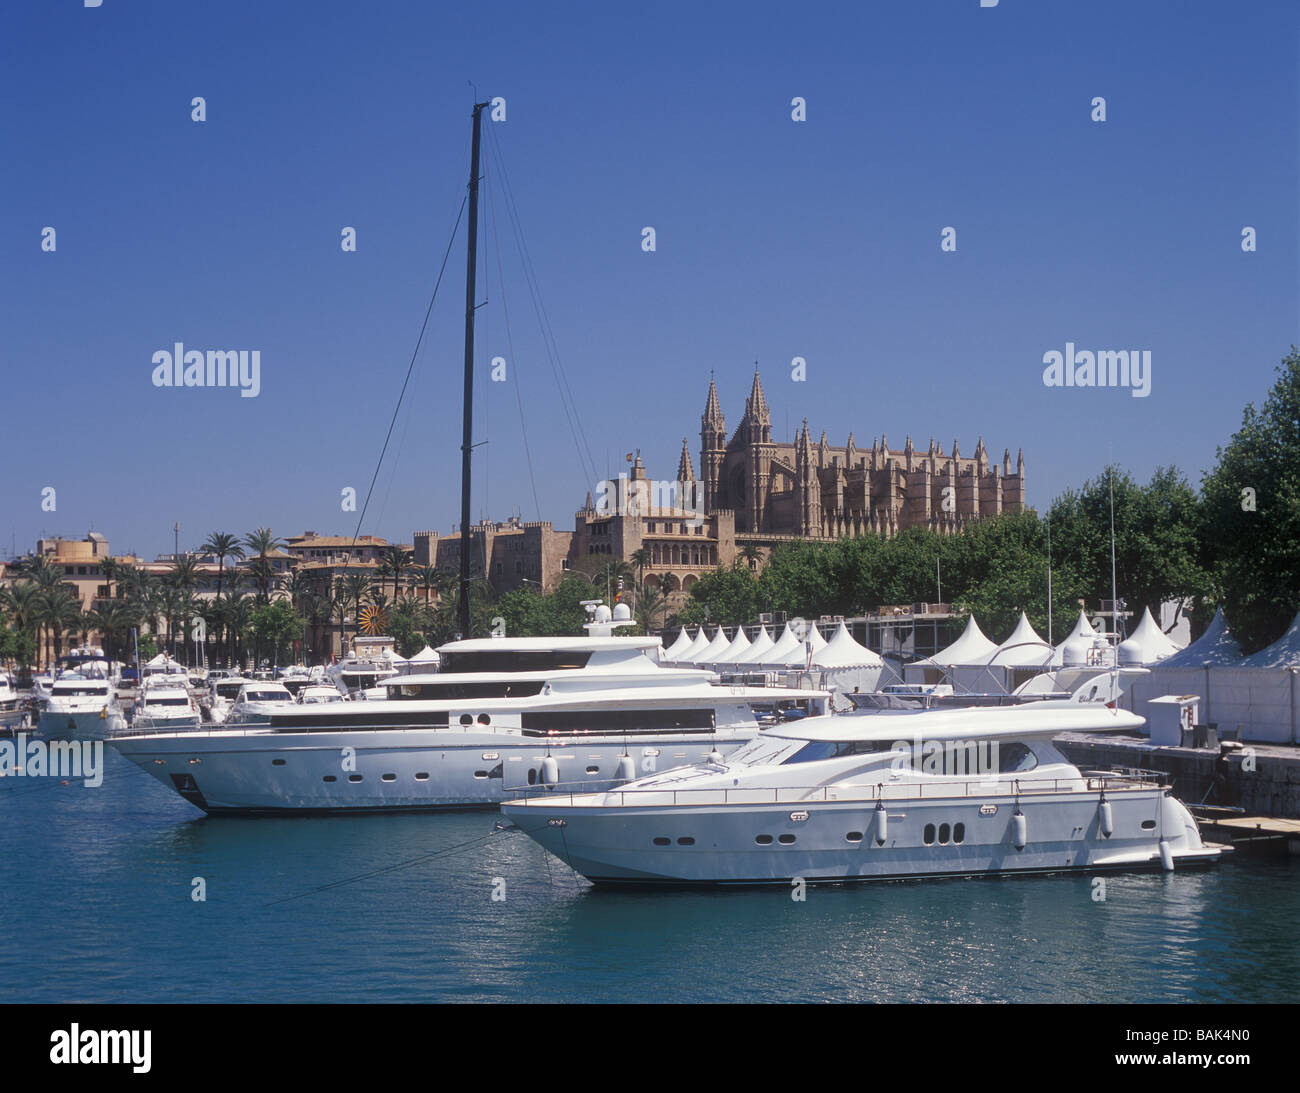 Palma International Boat Show 2009, during assembly of boats on display, with historic Palma Cathedral behind, Stock Photo